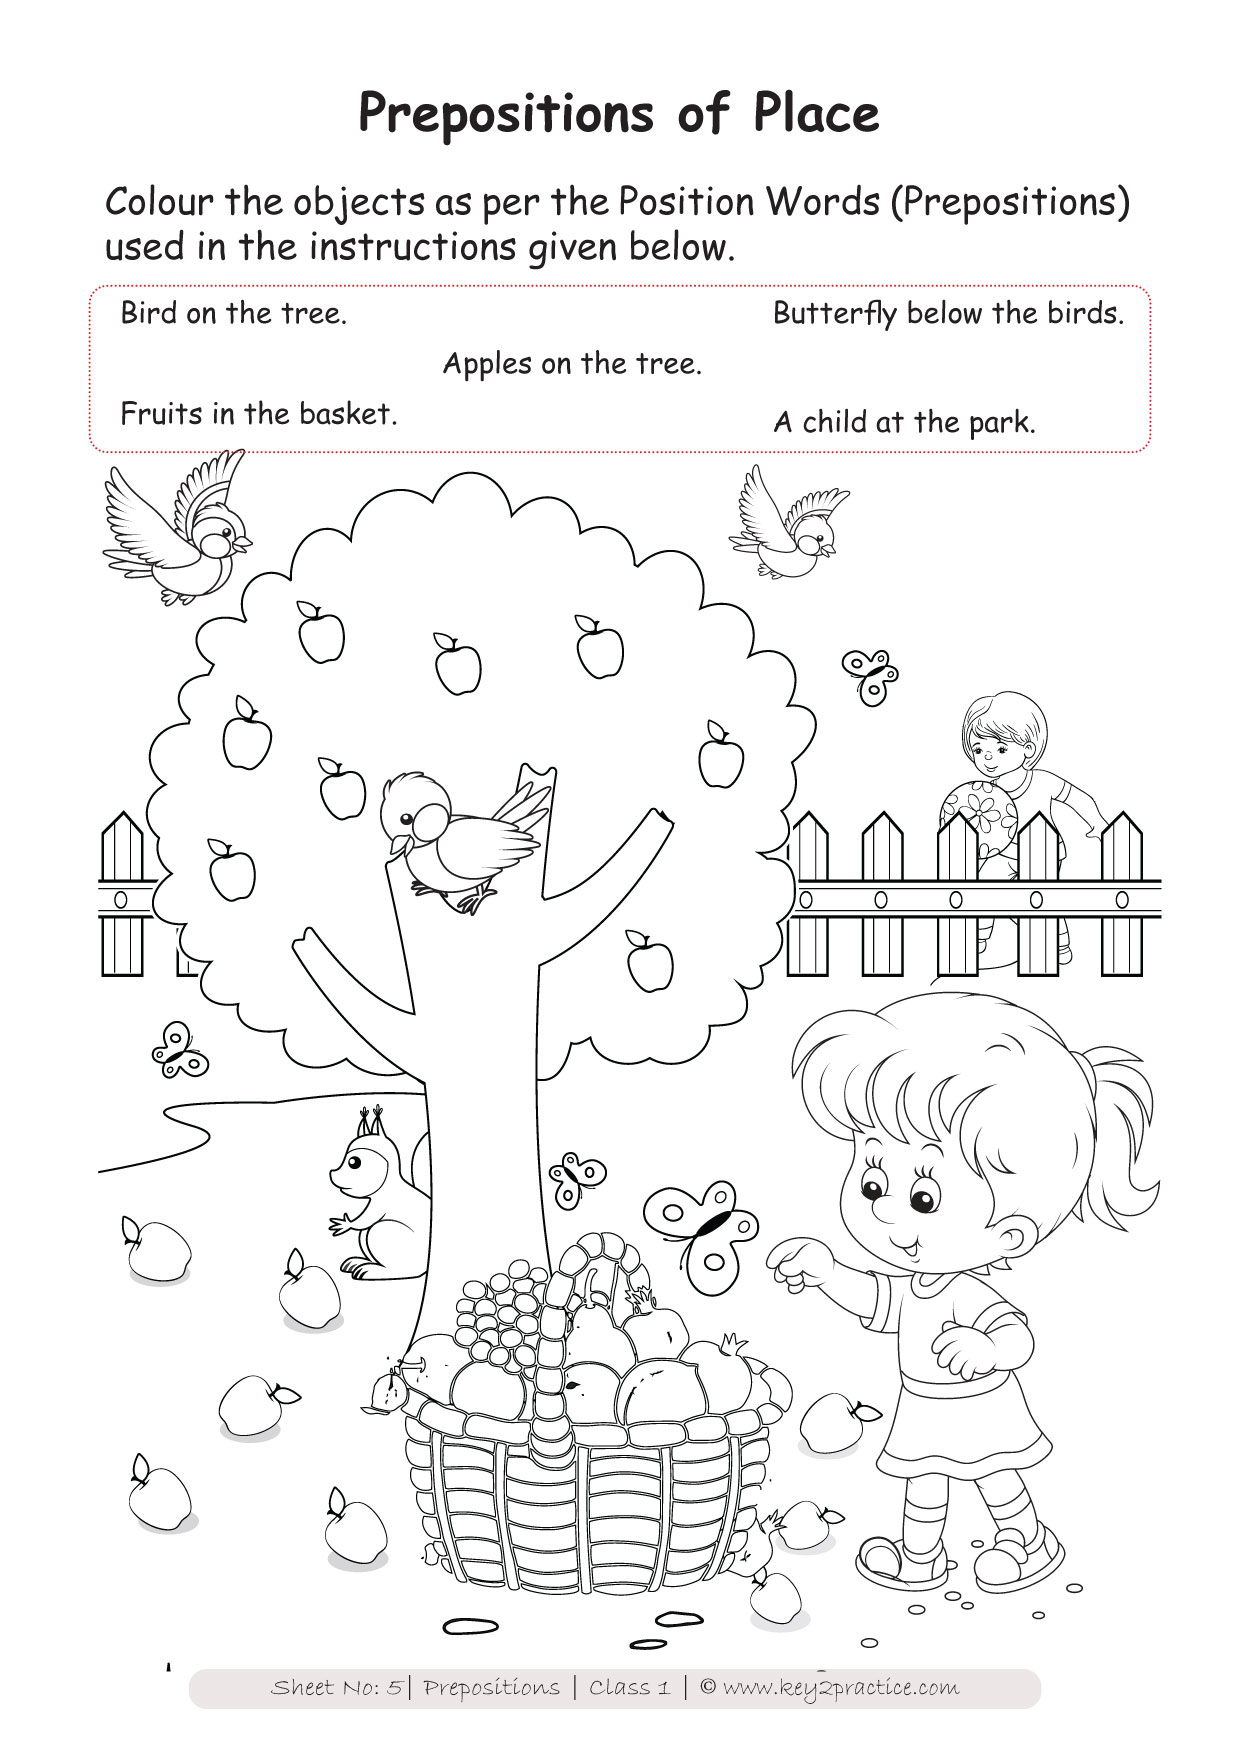 Grade 1 English Worksheets With Answers : 41 FREE ESL jokes worksheets